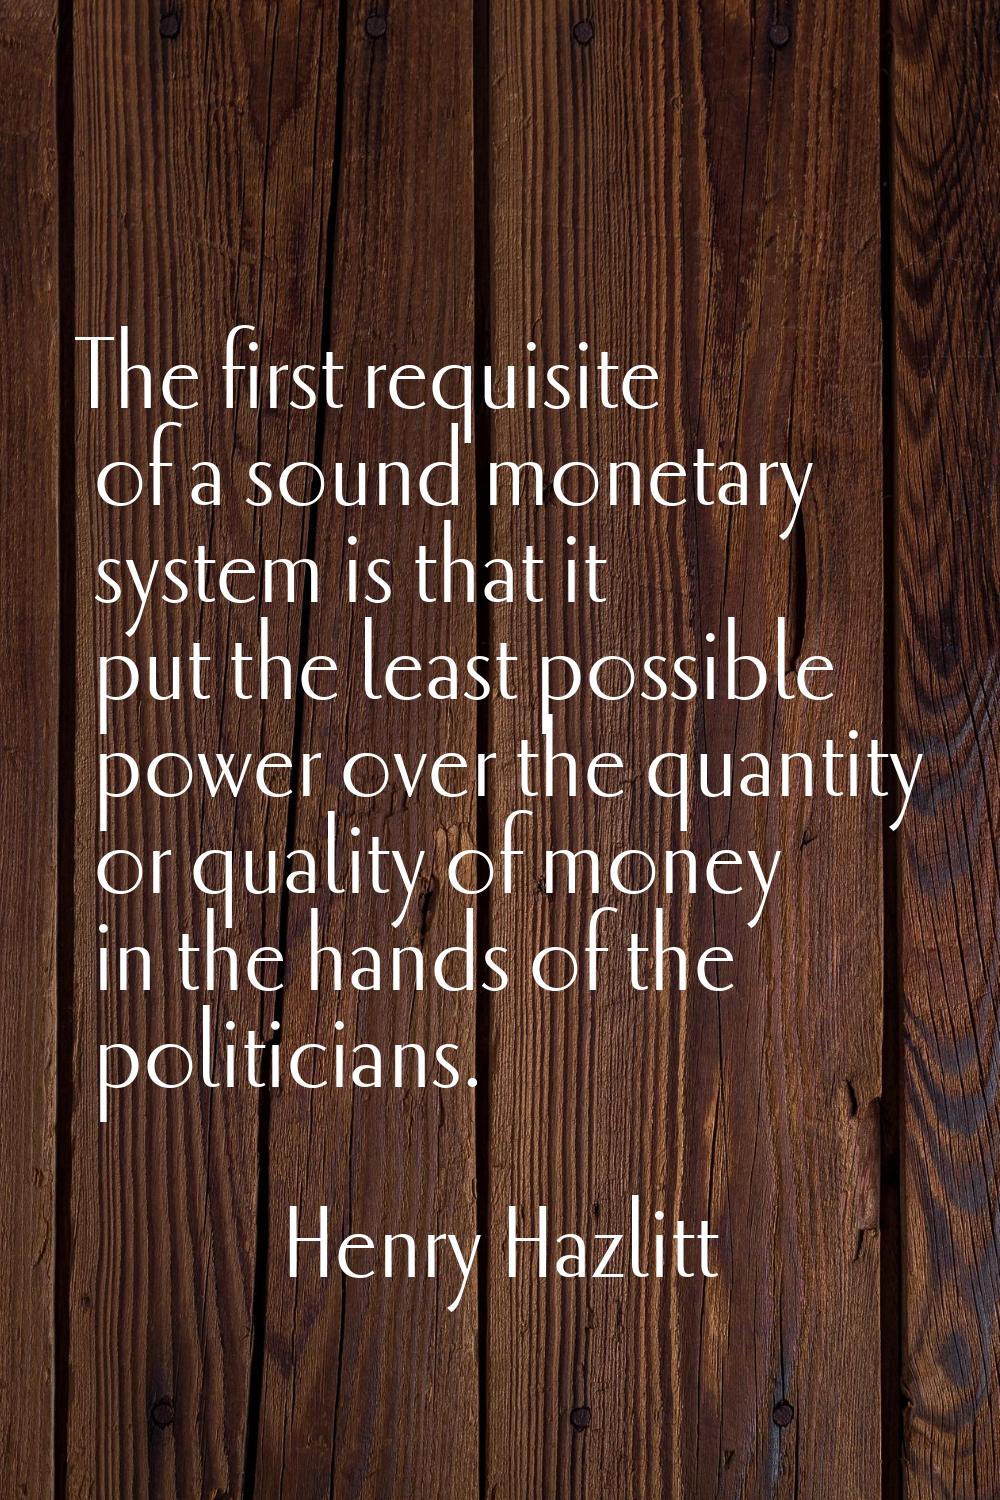 The first requisite of a sound monetary system is that it put the least possible power over the qua